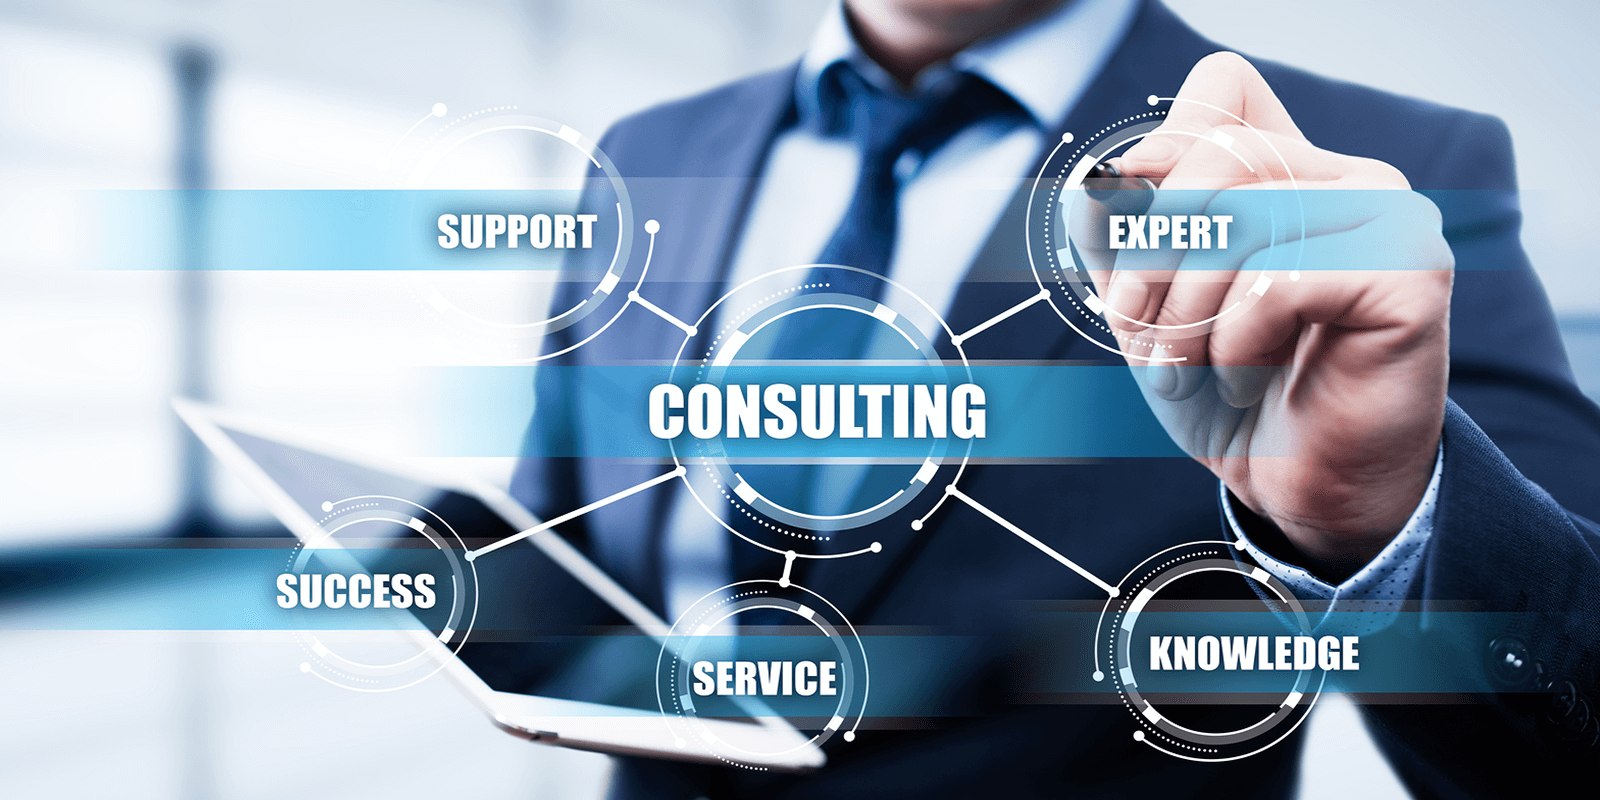 What Is Consulting? How to Find Consulting Jobs